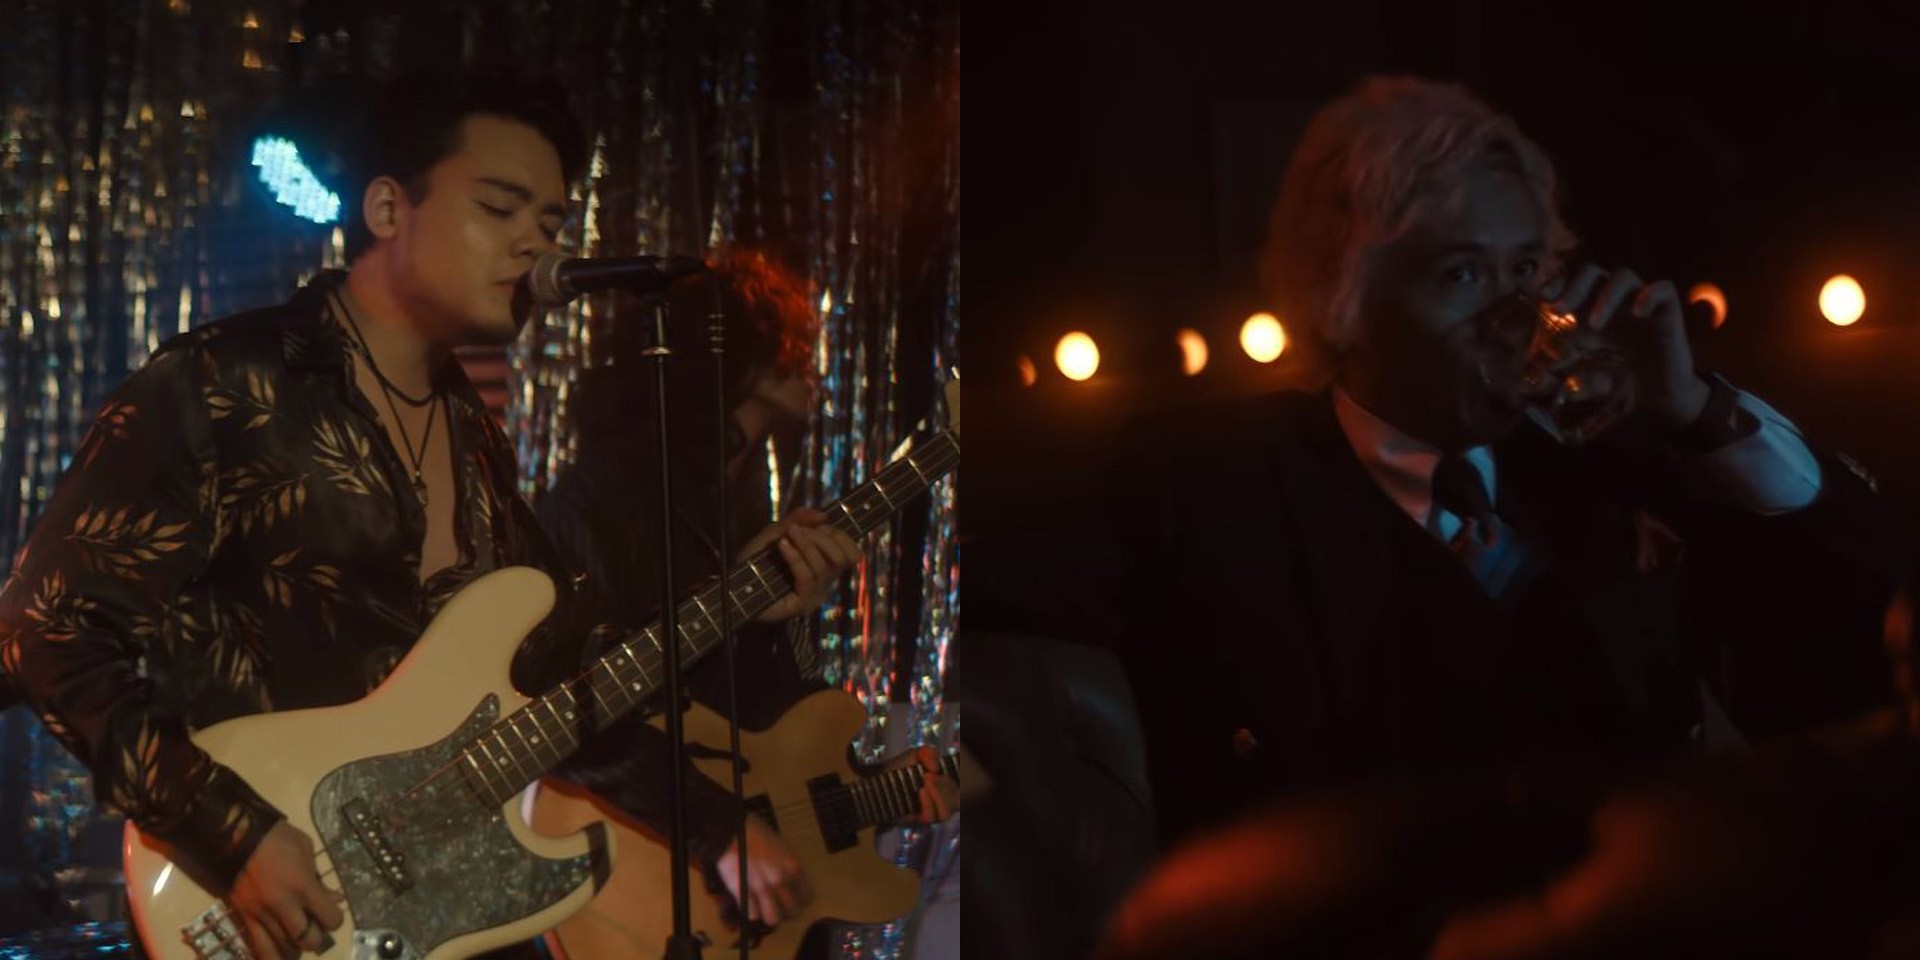 One Click Straight release 'Manila' music video, co-starring Ely Buendia – watch